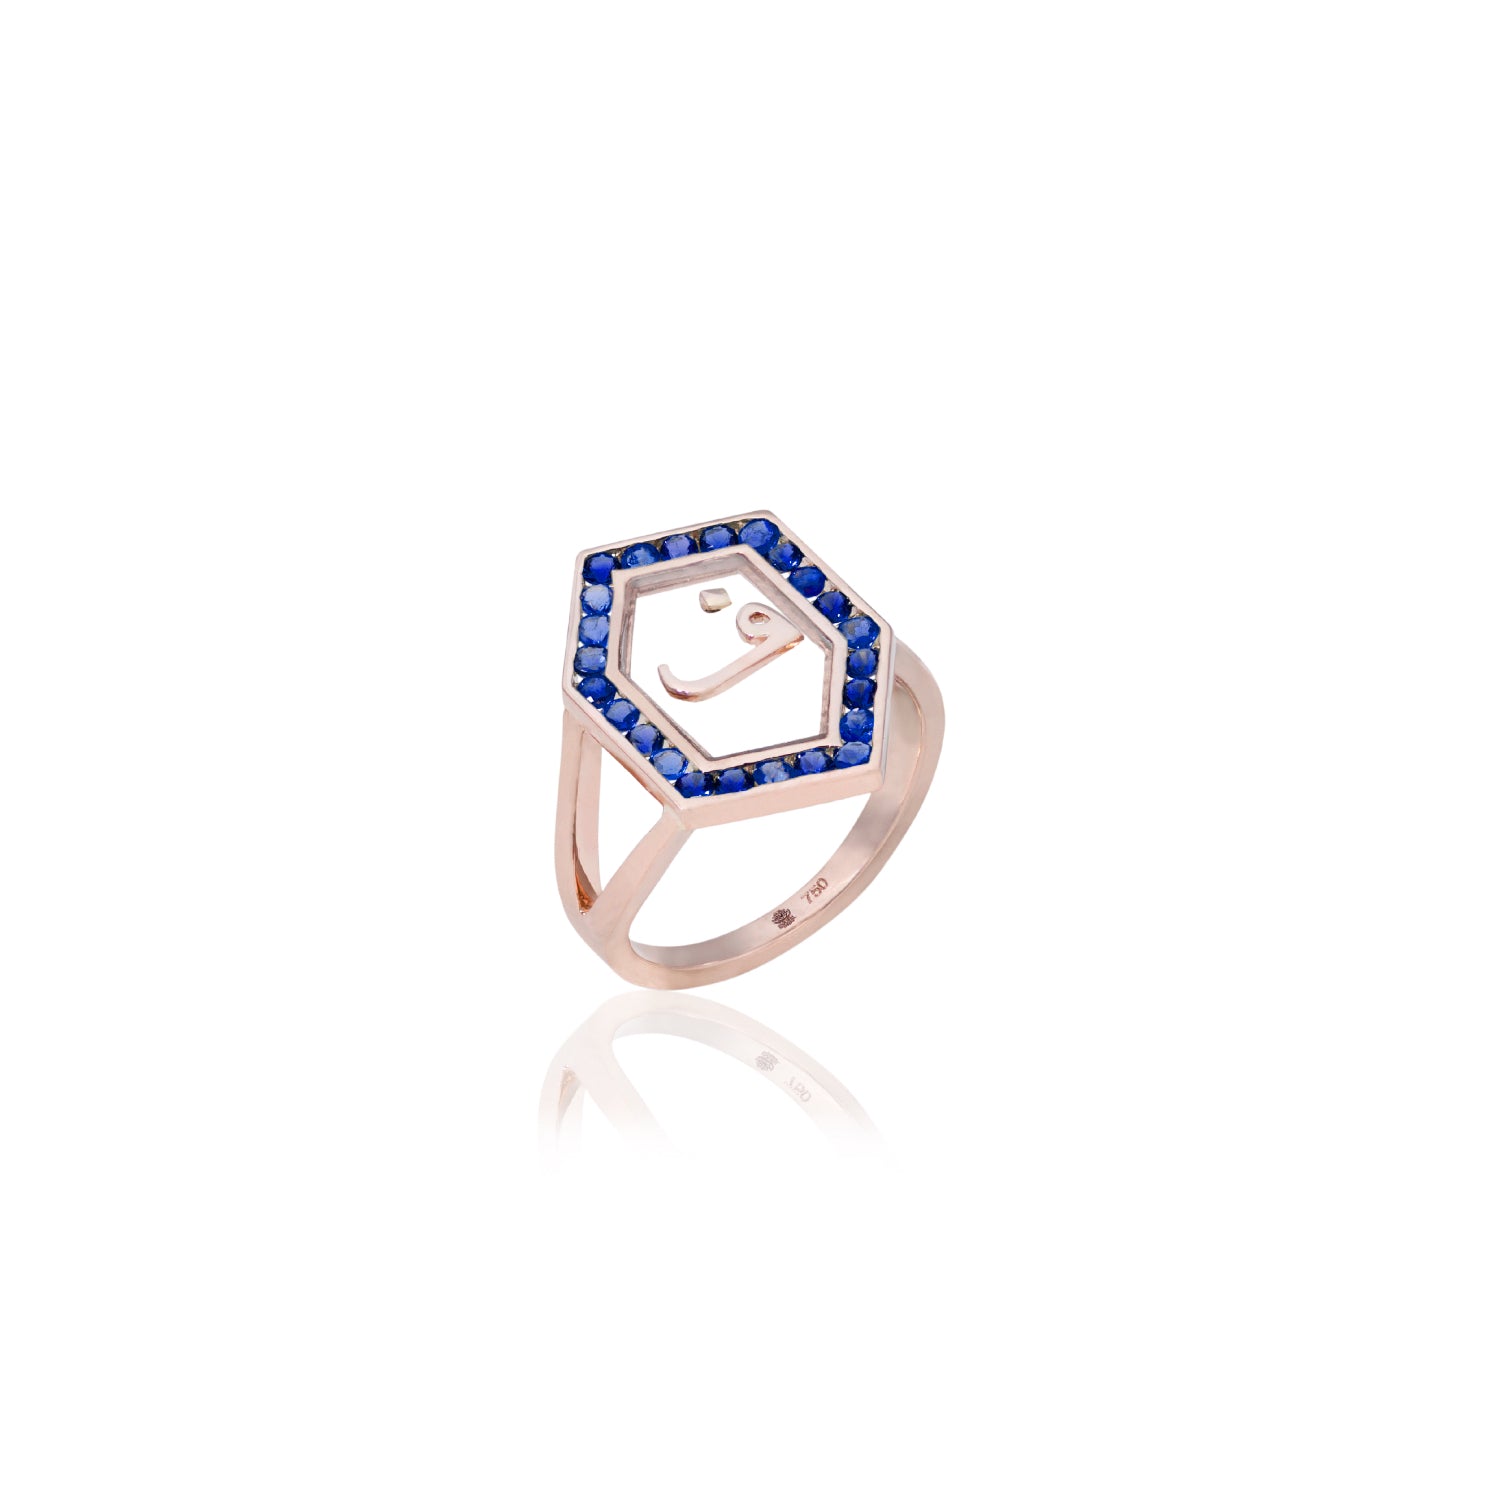 Qamoos 1.0 Letter ف Sapphire Ring in Rose Gold